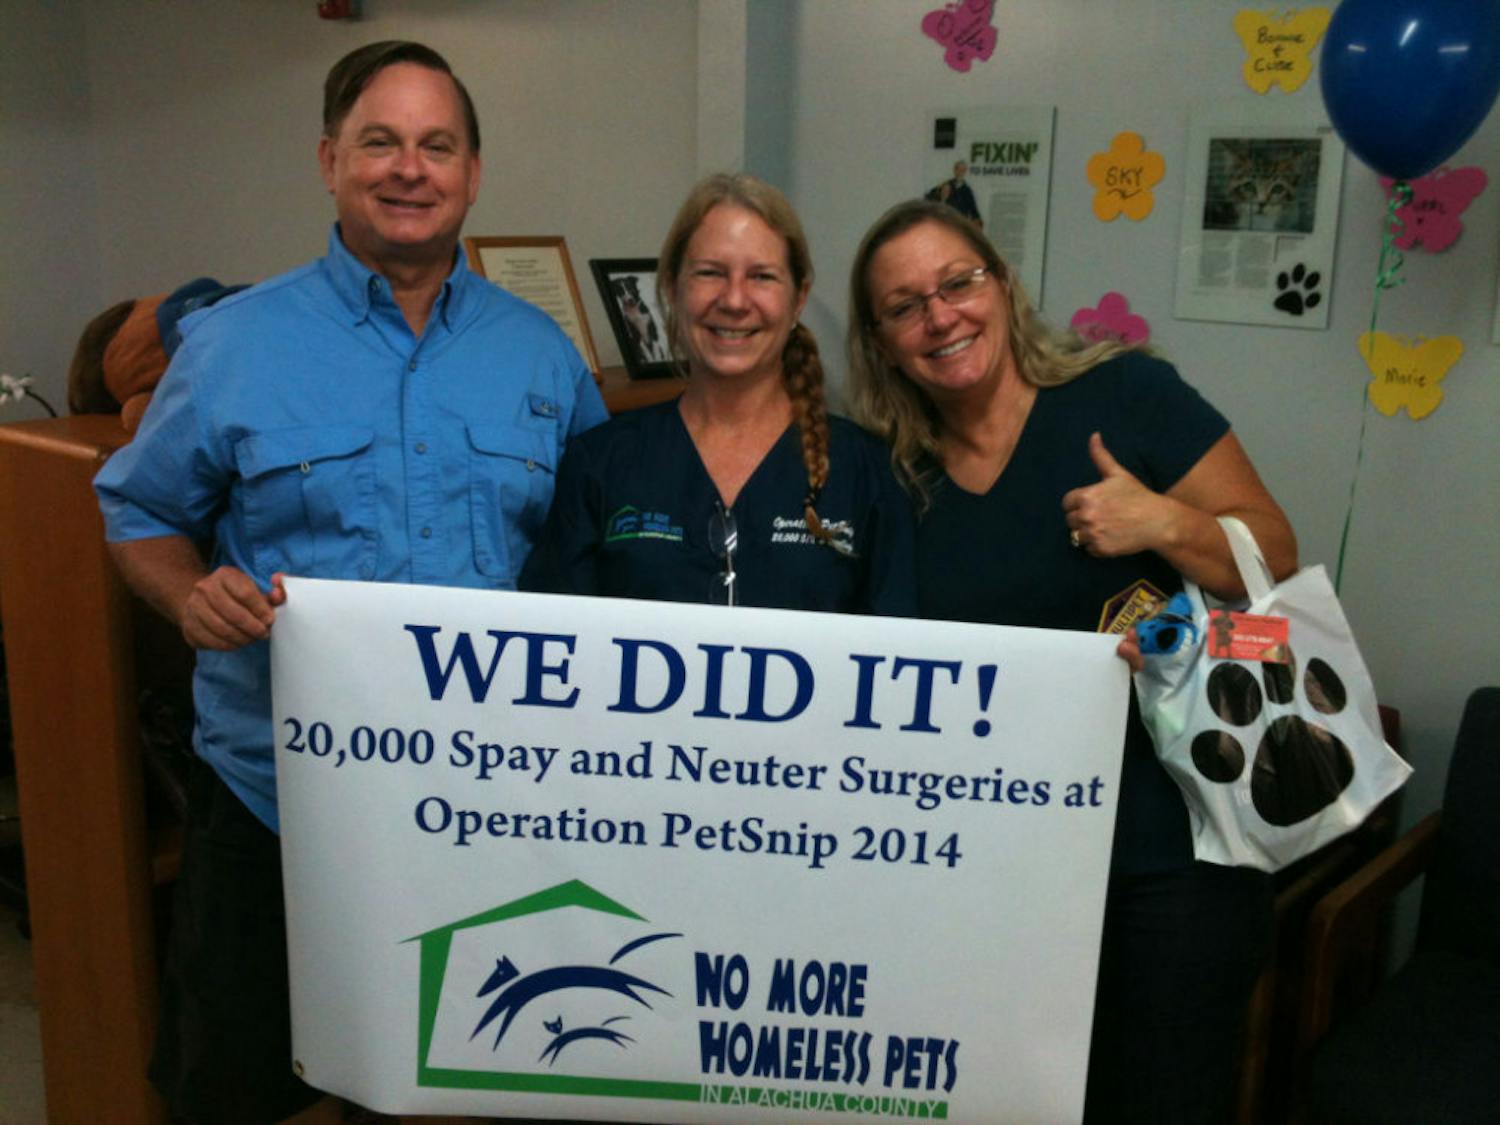 The “No More Homeless Pets” organization reaches its goal of completing 20,000 spay and neuter surgeries at Operation PetSnip 2014 in Alachua County.